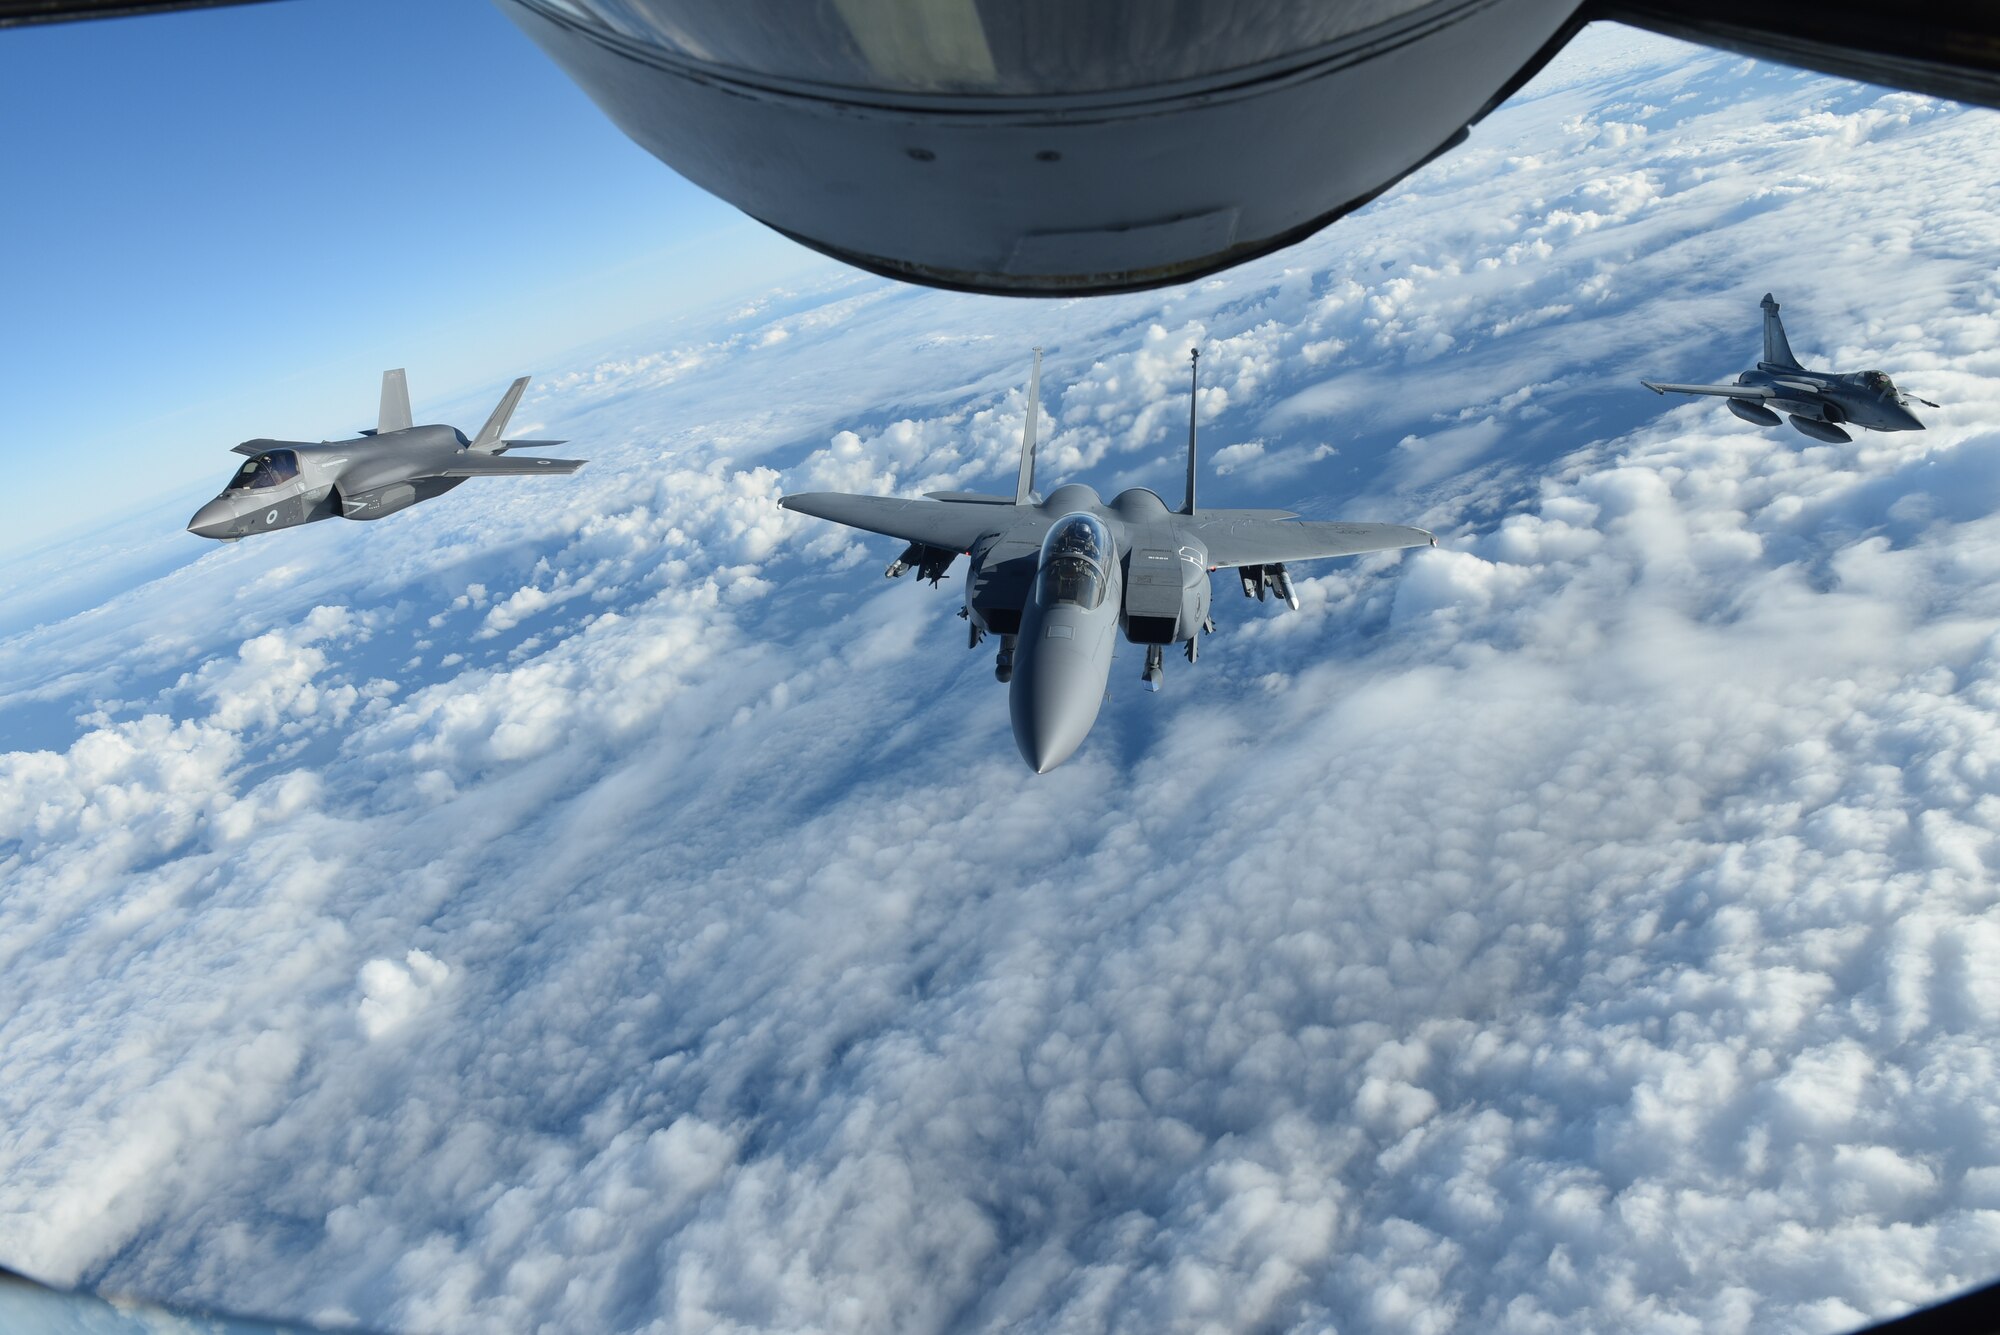 A Royal Air Force F-35 Lightning II, U.S. Air Force F-15E Strike Eagle, and French air force Dassault Rafale fly behind a U.S. Air Force KC-135 Stratotanker from the 100th Air Refueling Wing during Exercise Point Blank over the English Channel, Nov. 27, 2018. Training with NATO allies like the U.K. and France improves interoperability and demonstrates the United States’ commitment to regional security. Exercise Point Blank also represents an opportunity to enhance interoperability and integration between allied fourth and fifth-generation fighter aircraft. (U.S. Air Force photo by Senior Airman Luke Milano)